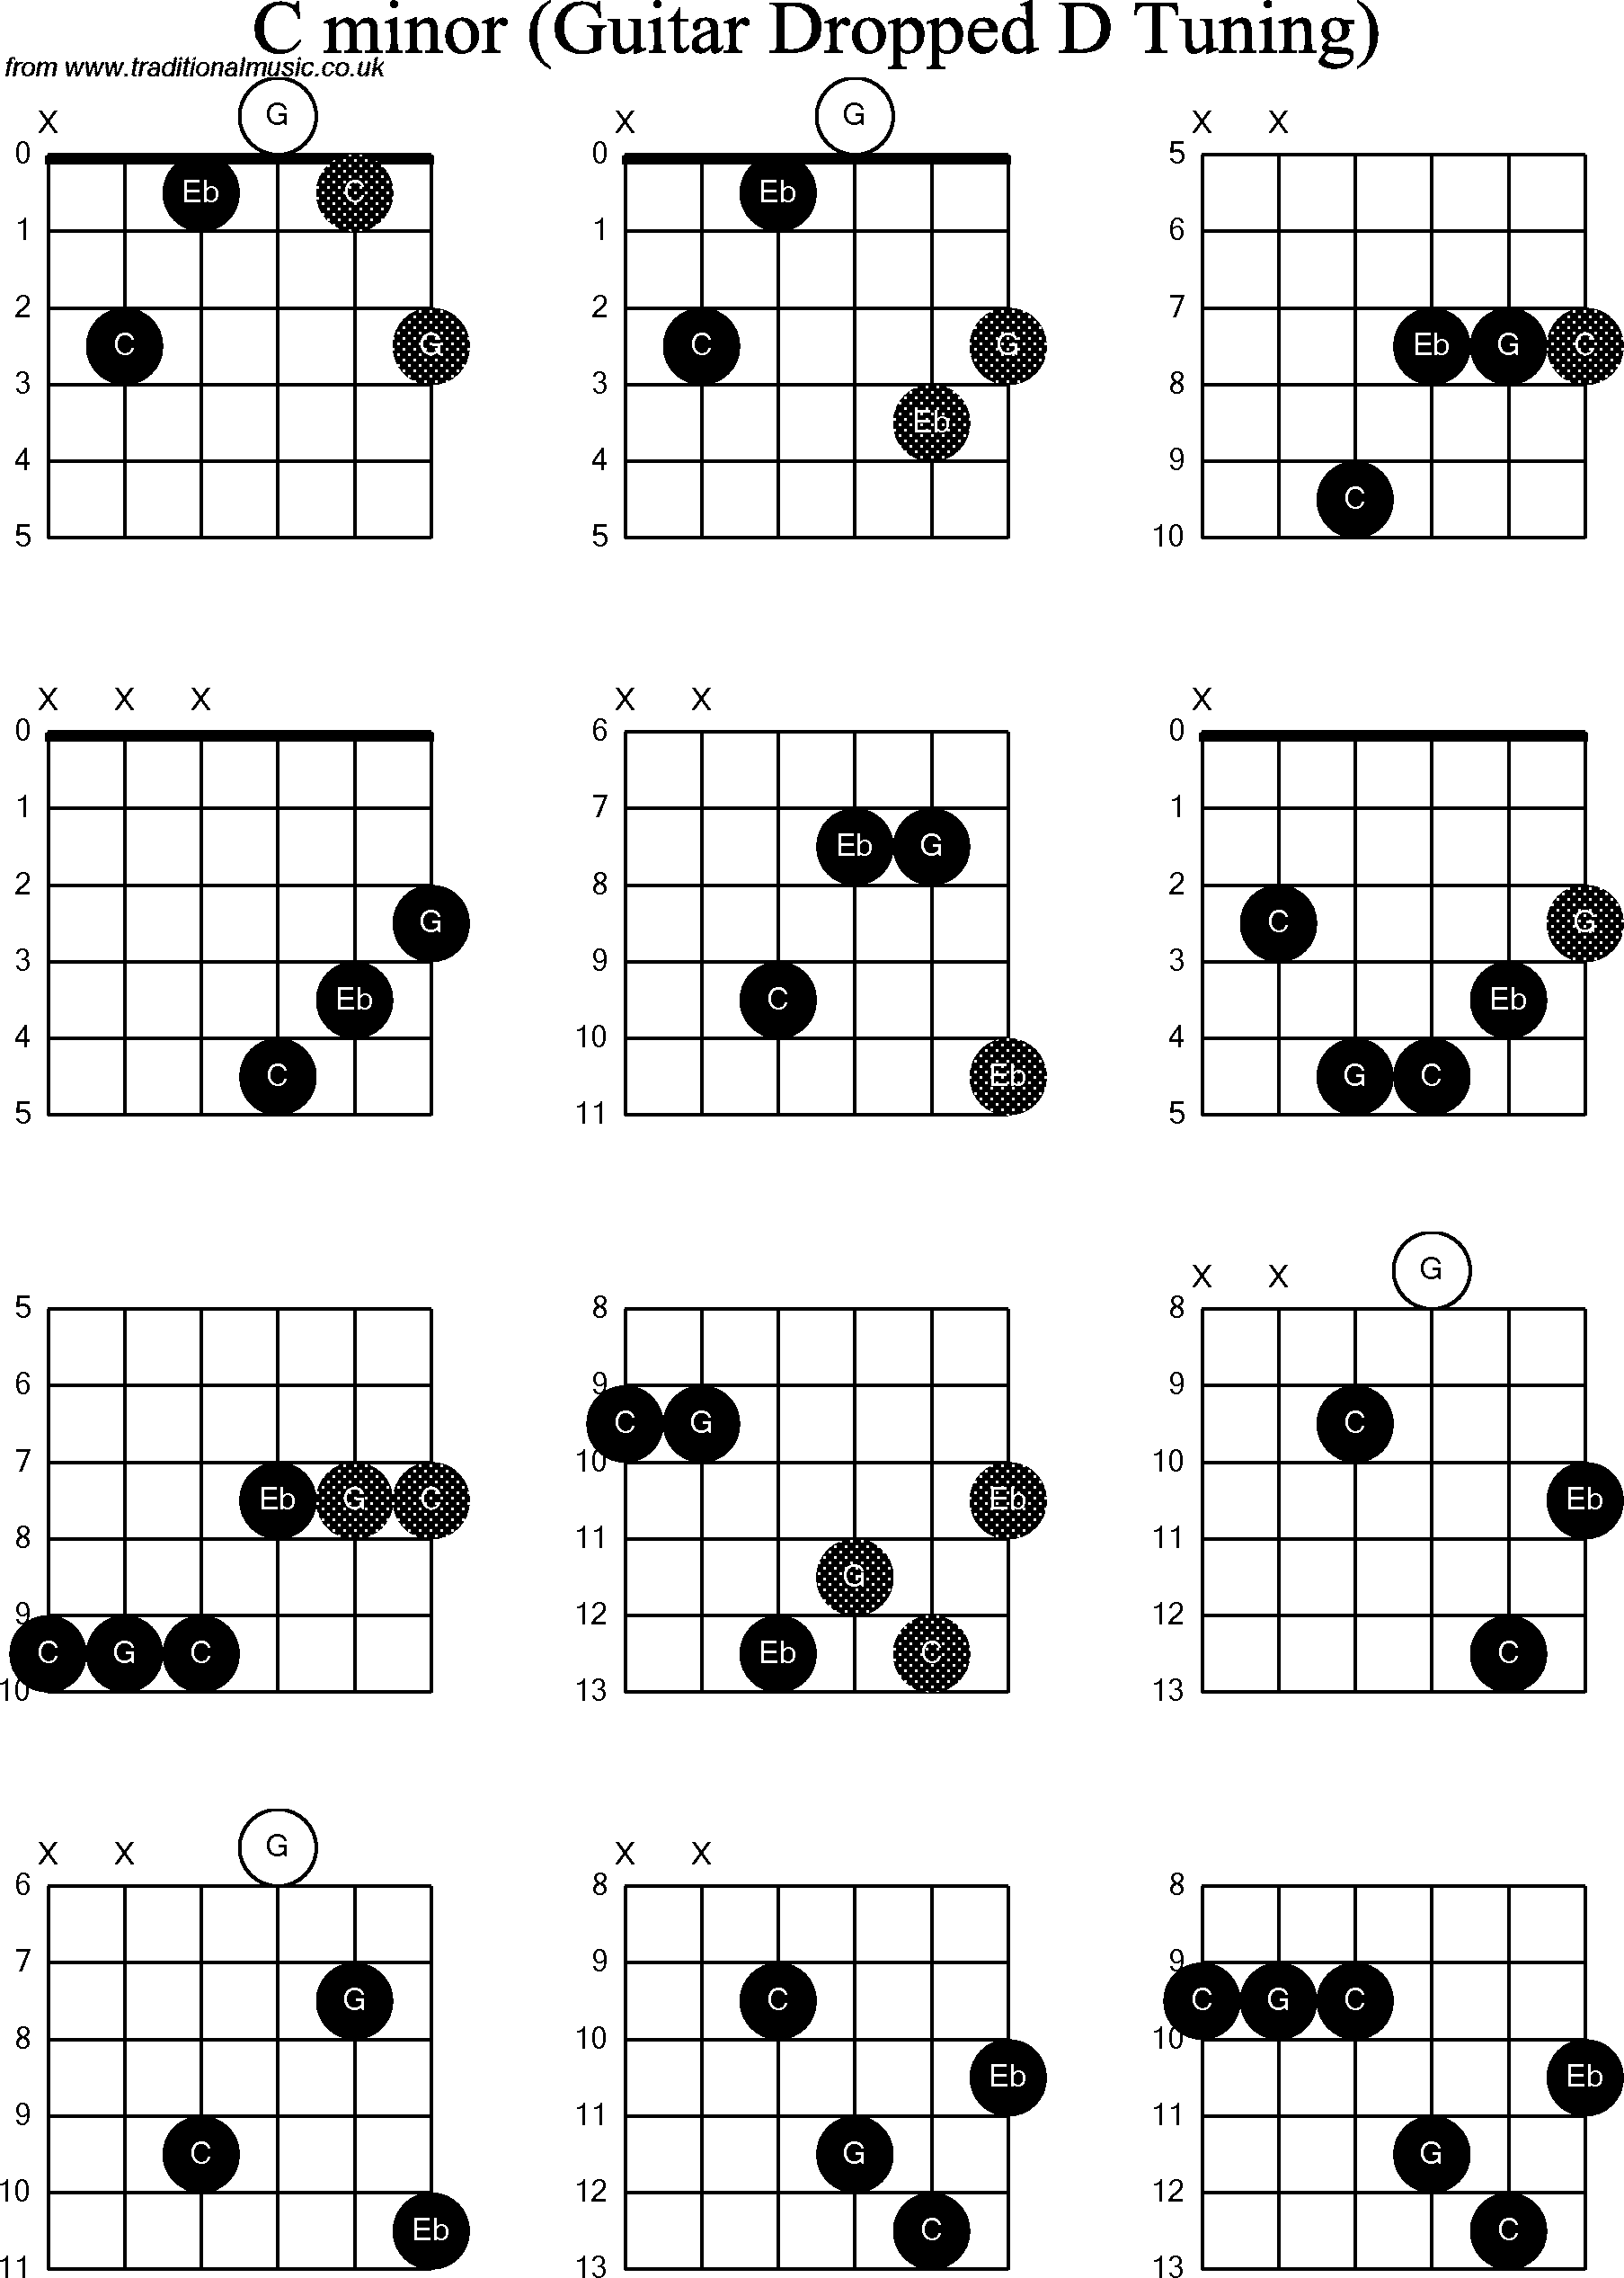 Chord diagrams for dropped D Guitar(DADGBE), C Minor